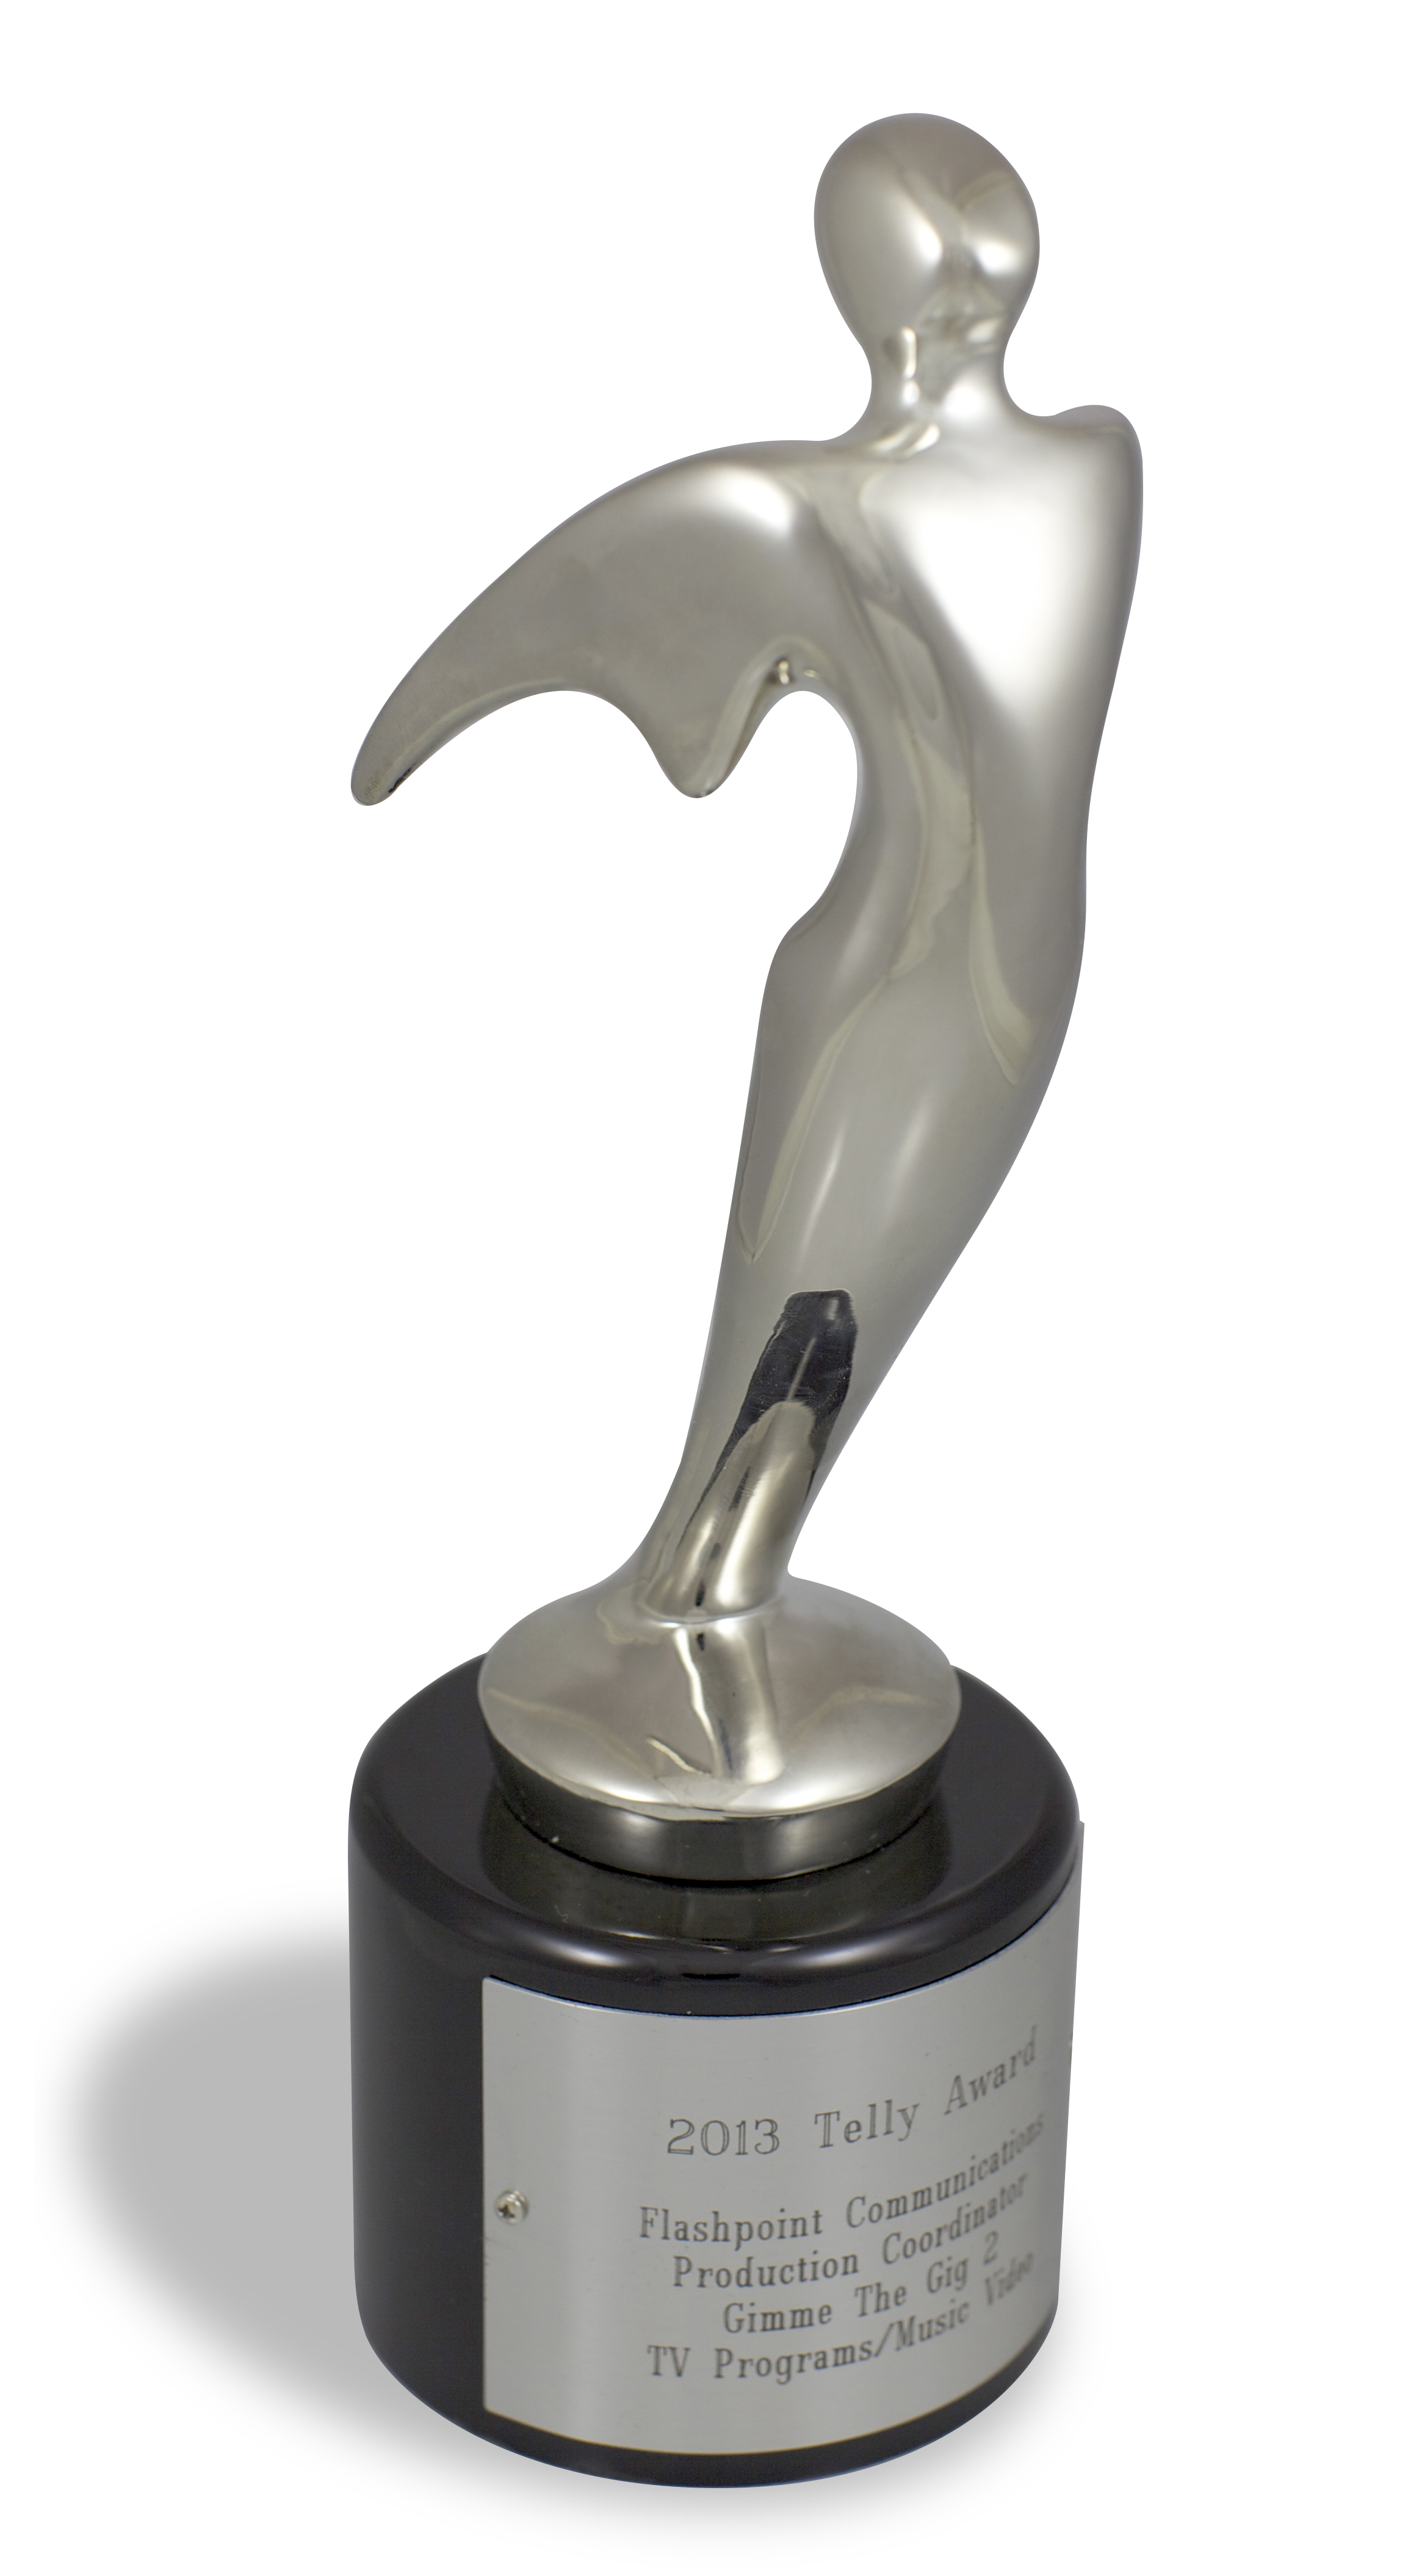 2013 Telly Award Flash Point Communications